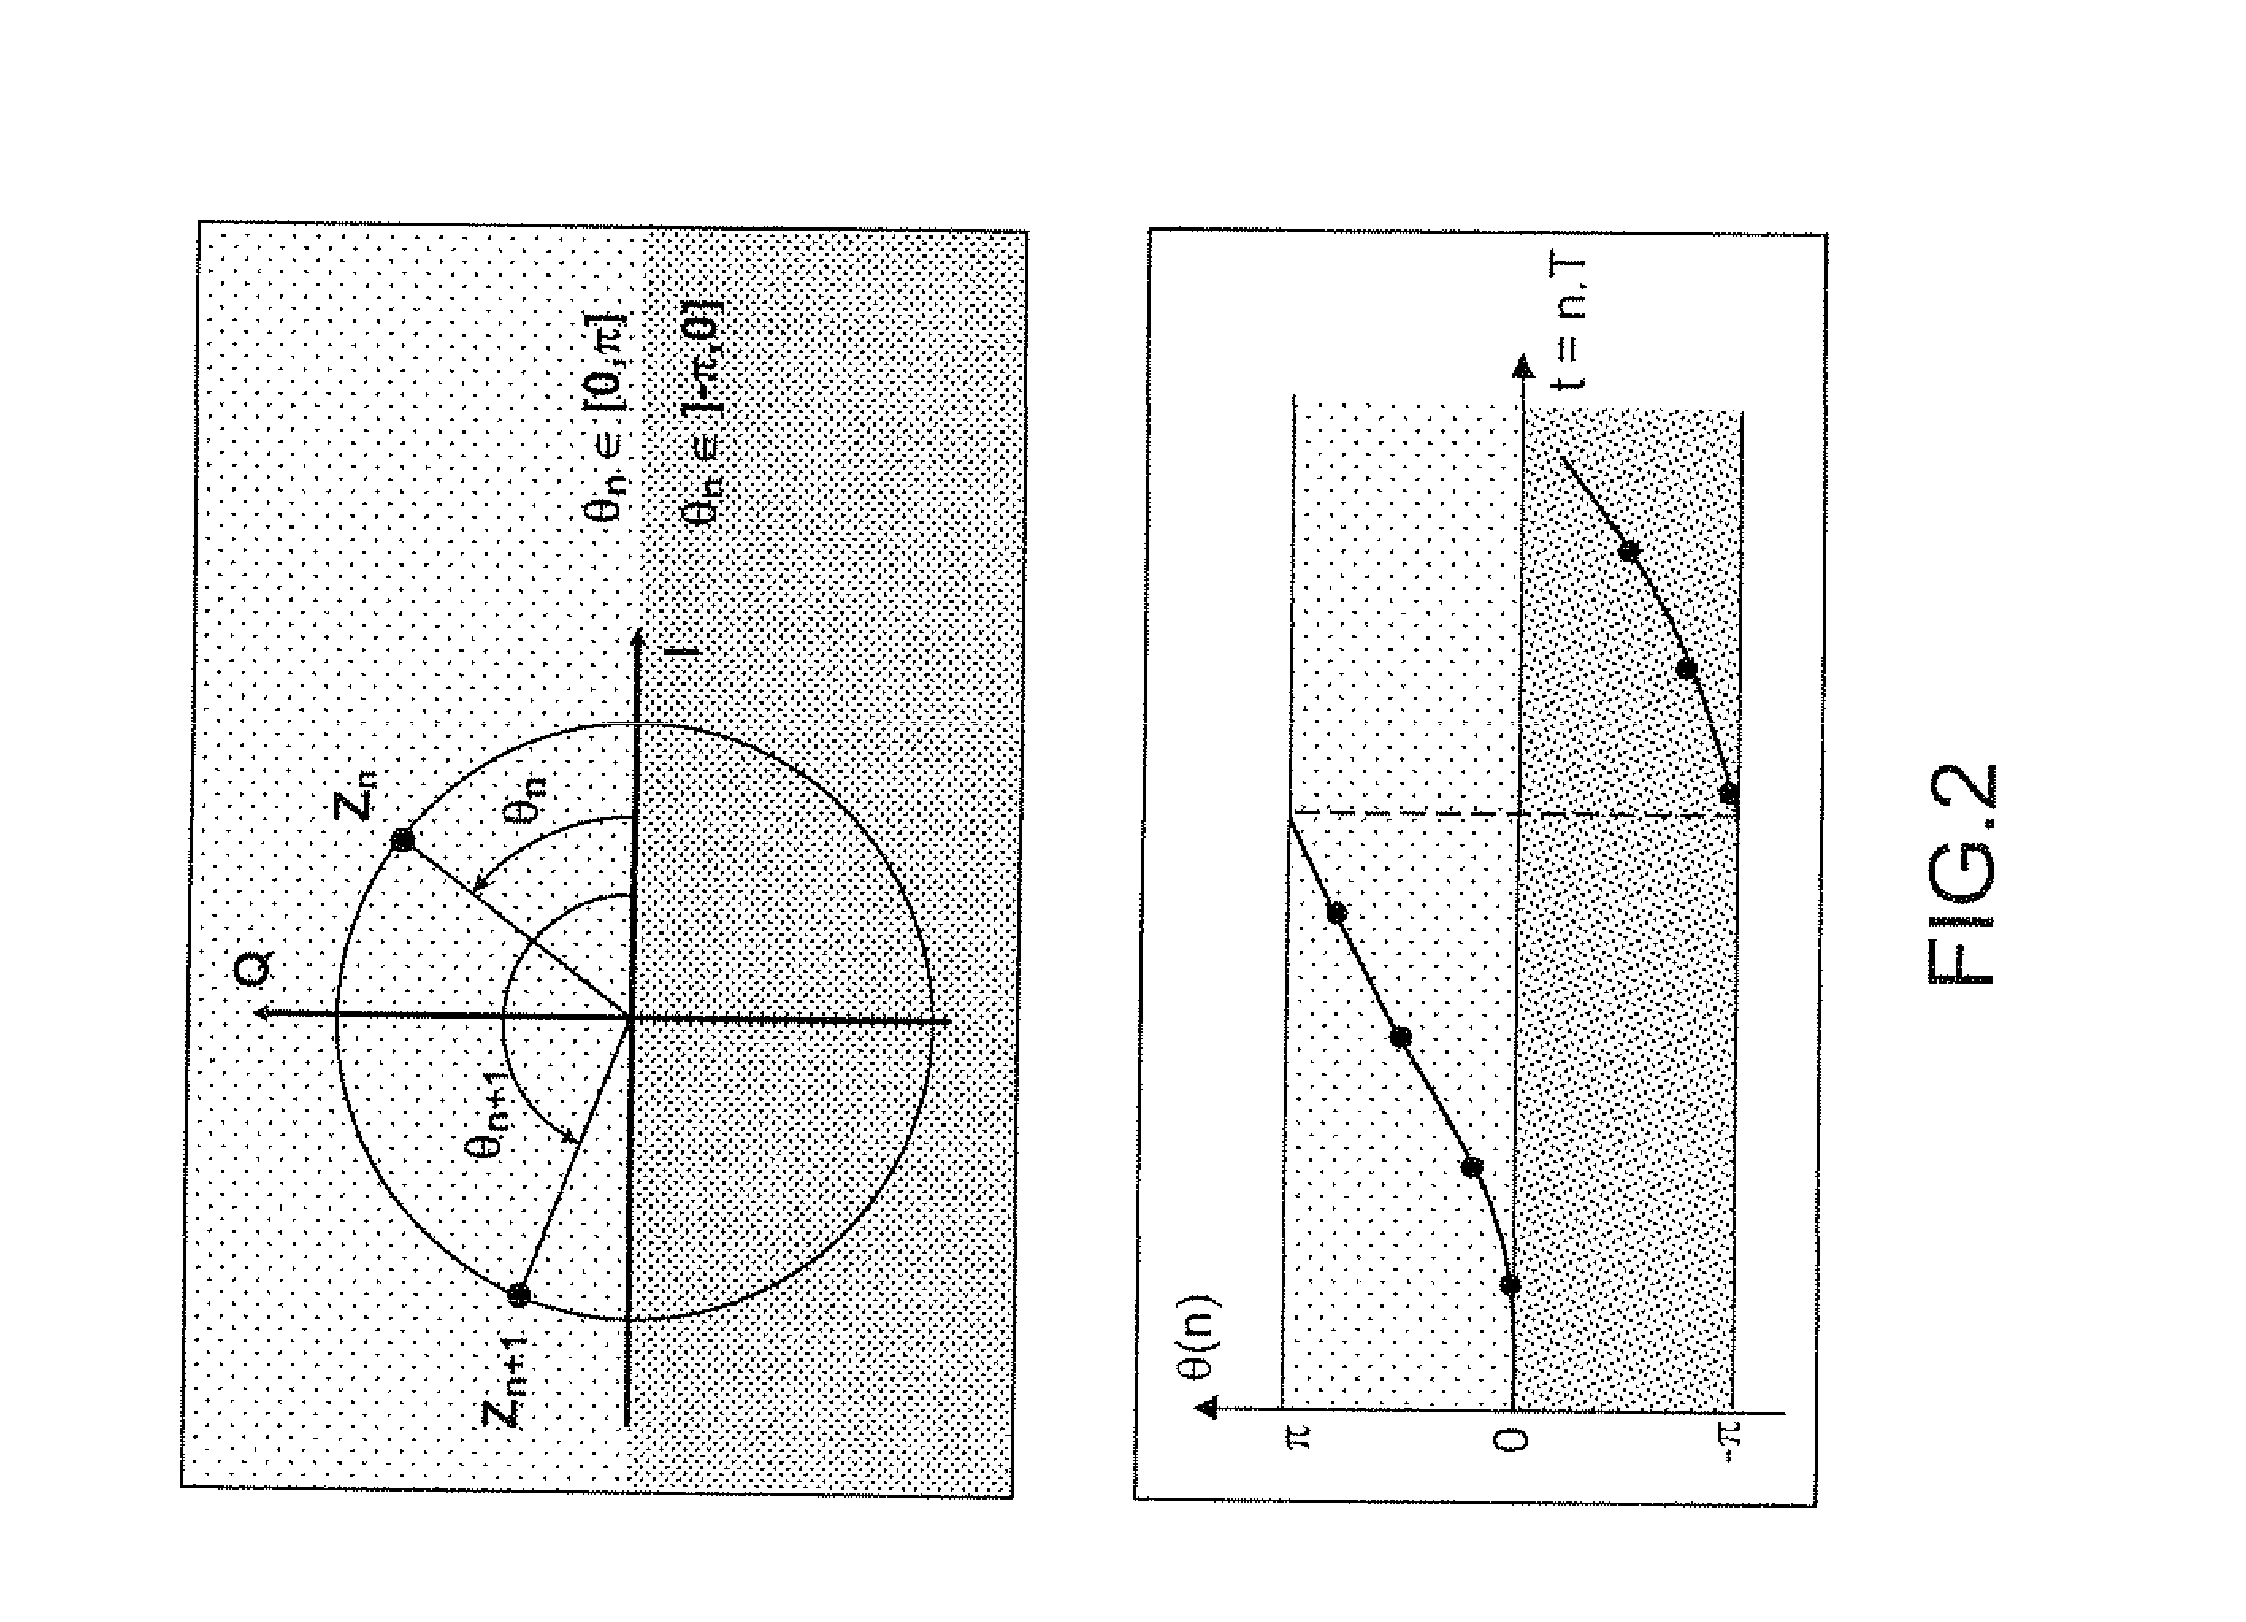 Device for discriminating the phase and the phase variation of a signal